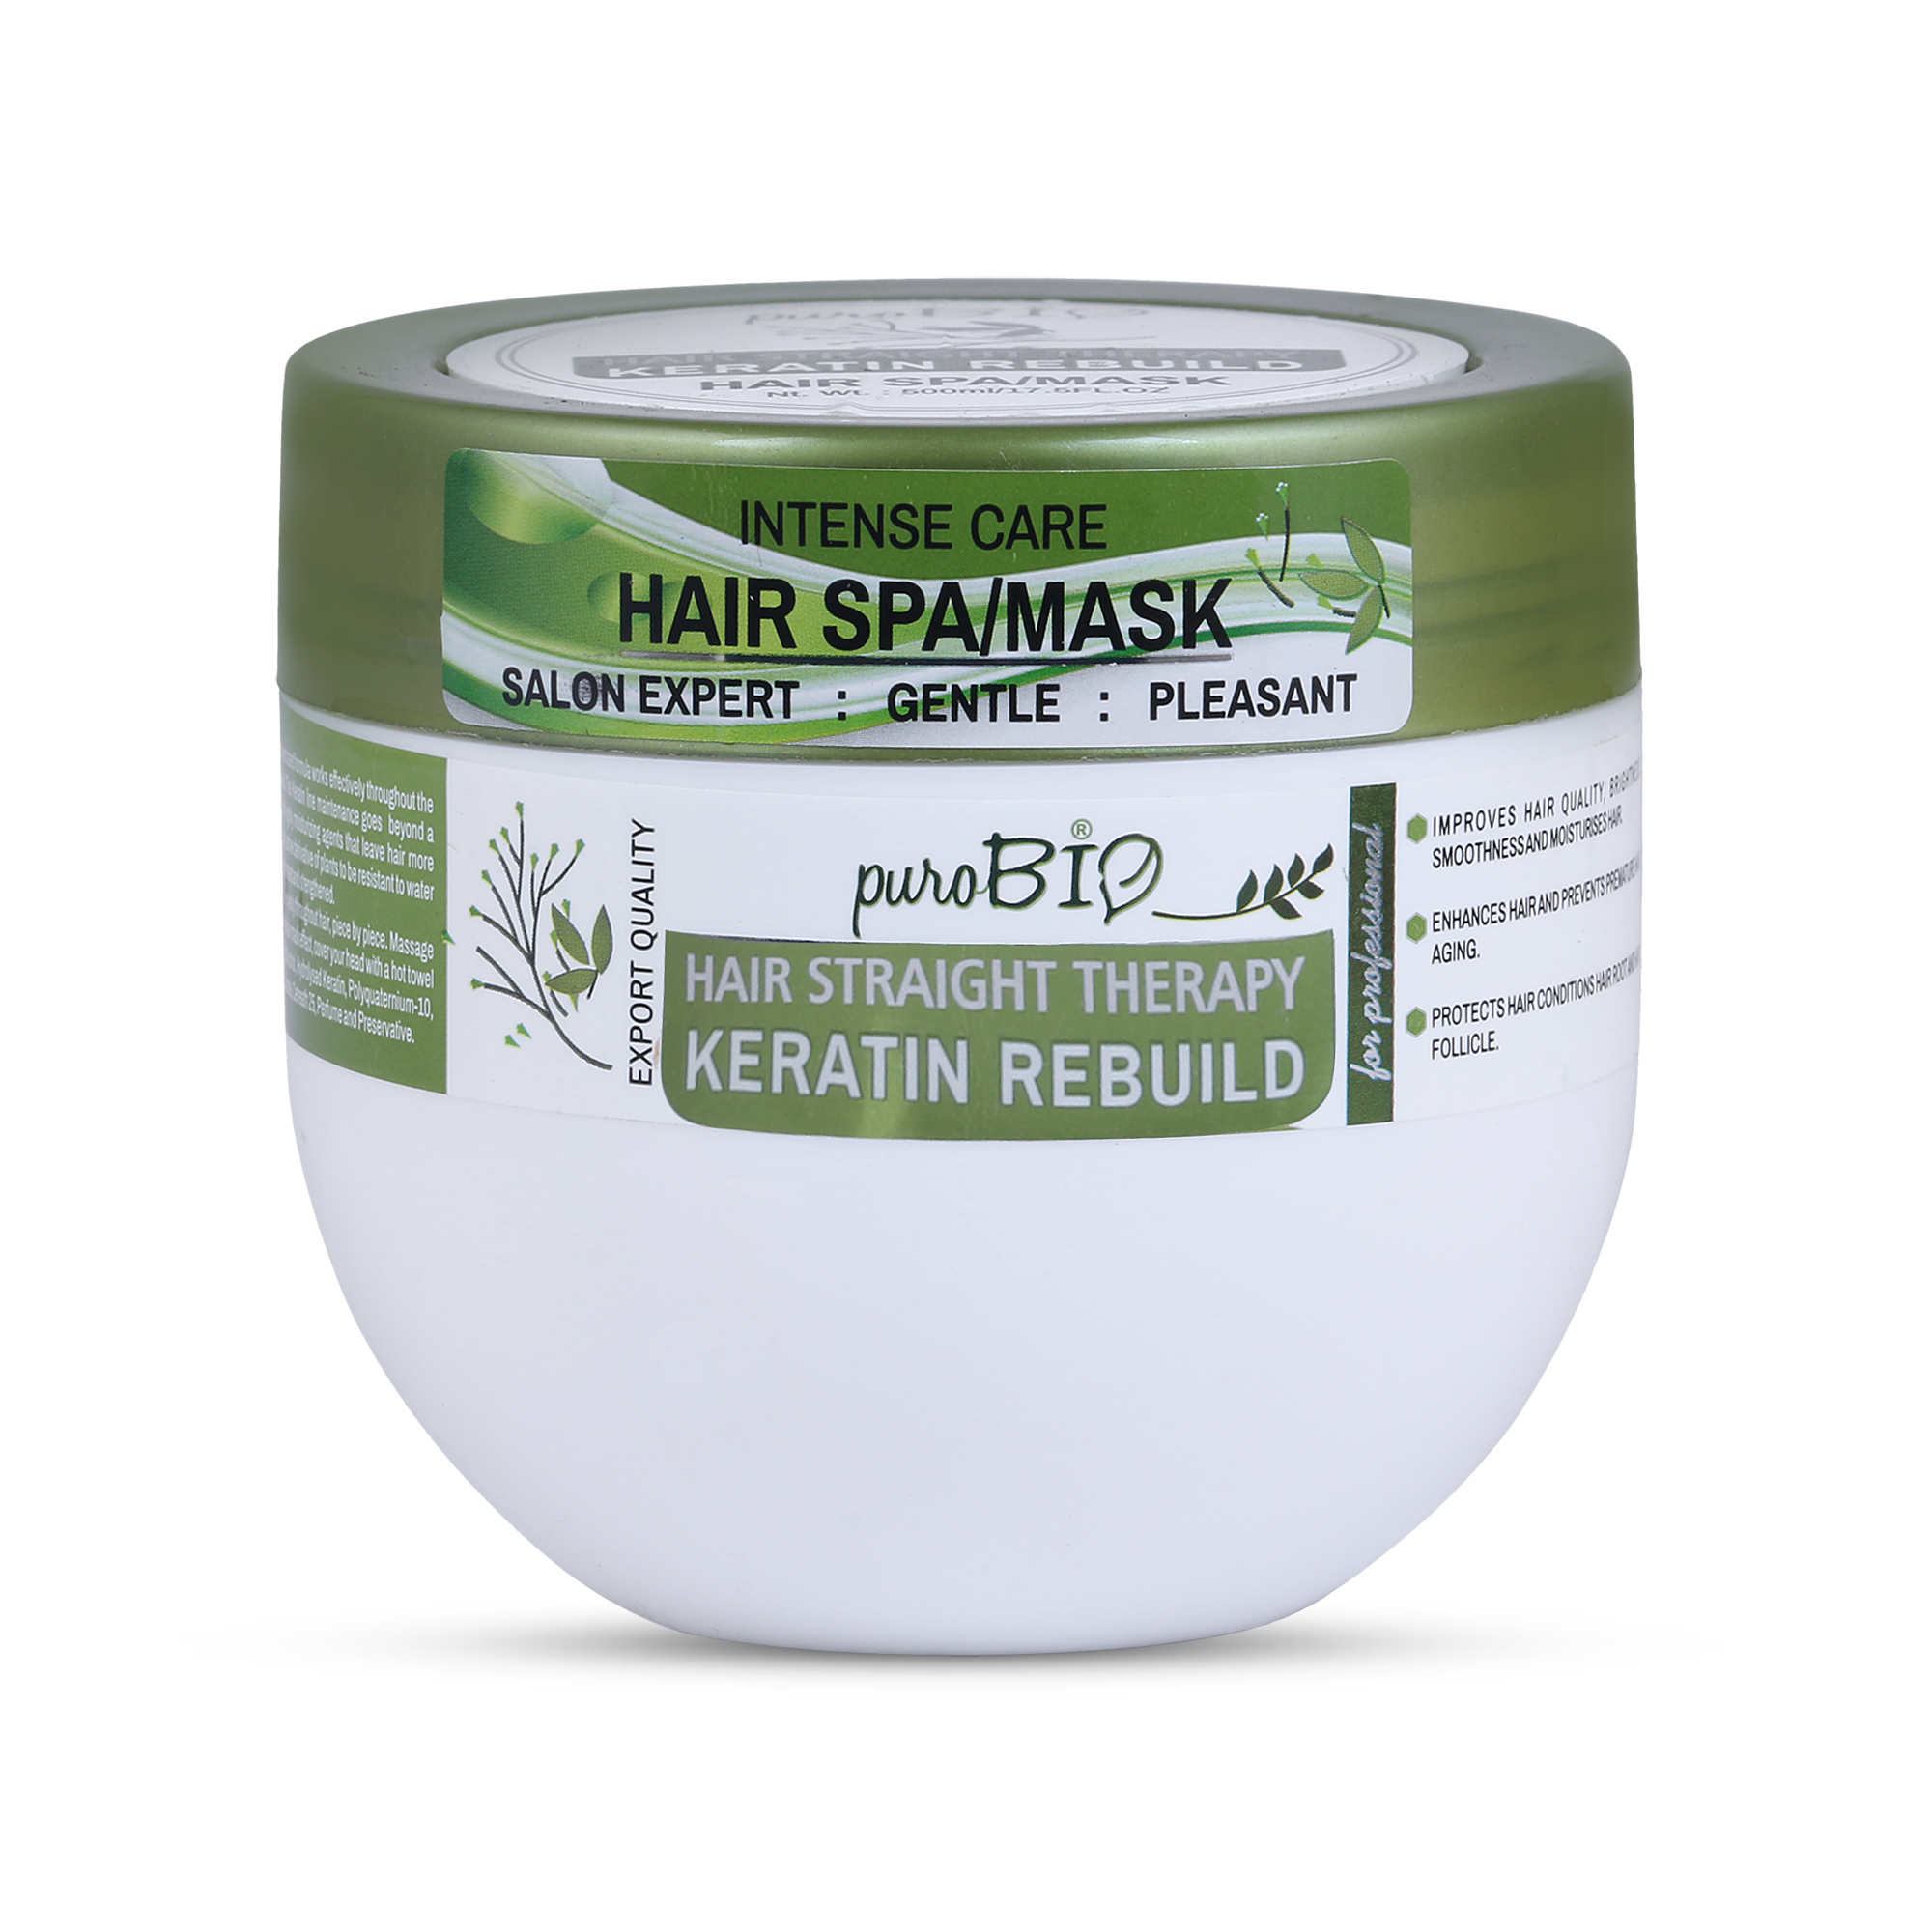 Sulphate free Hair Spa Mask